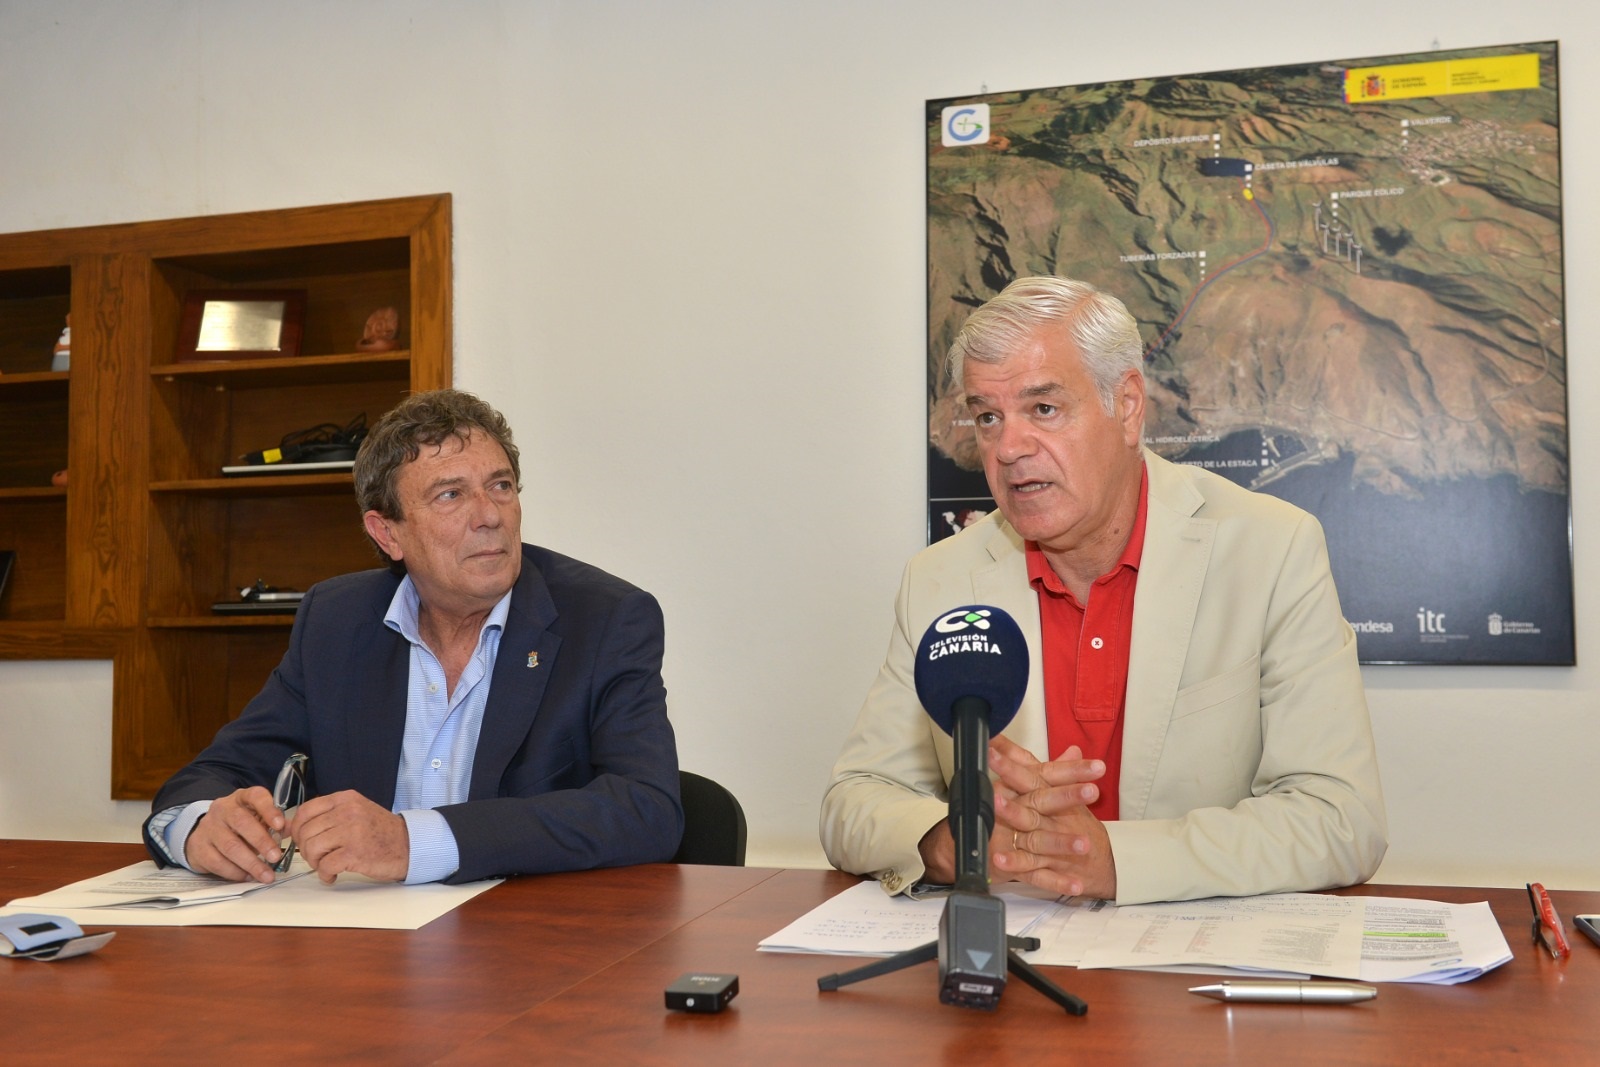 The Hydro-Wind Power Plant adds more than 2 million euros to the current budget of the Cabildo (local government) of El Hierro.